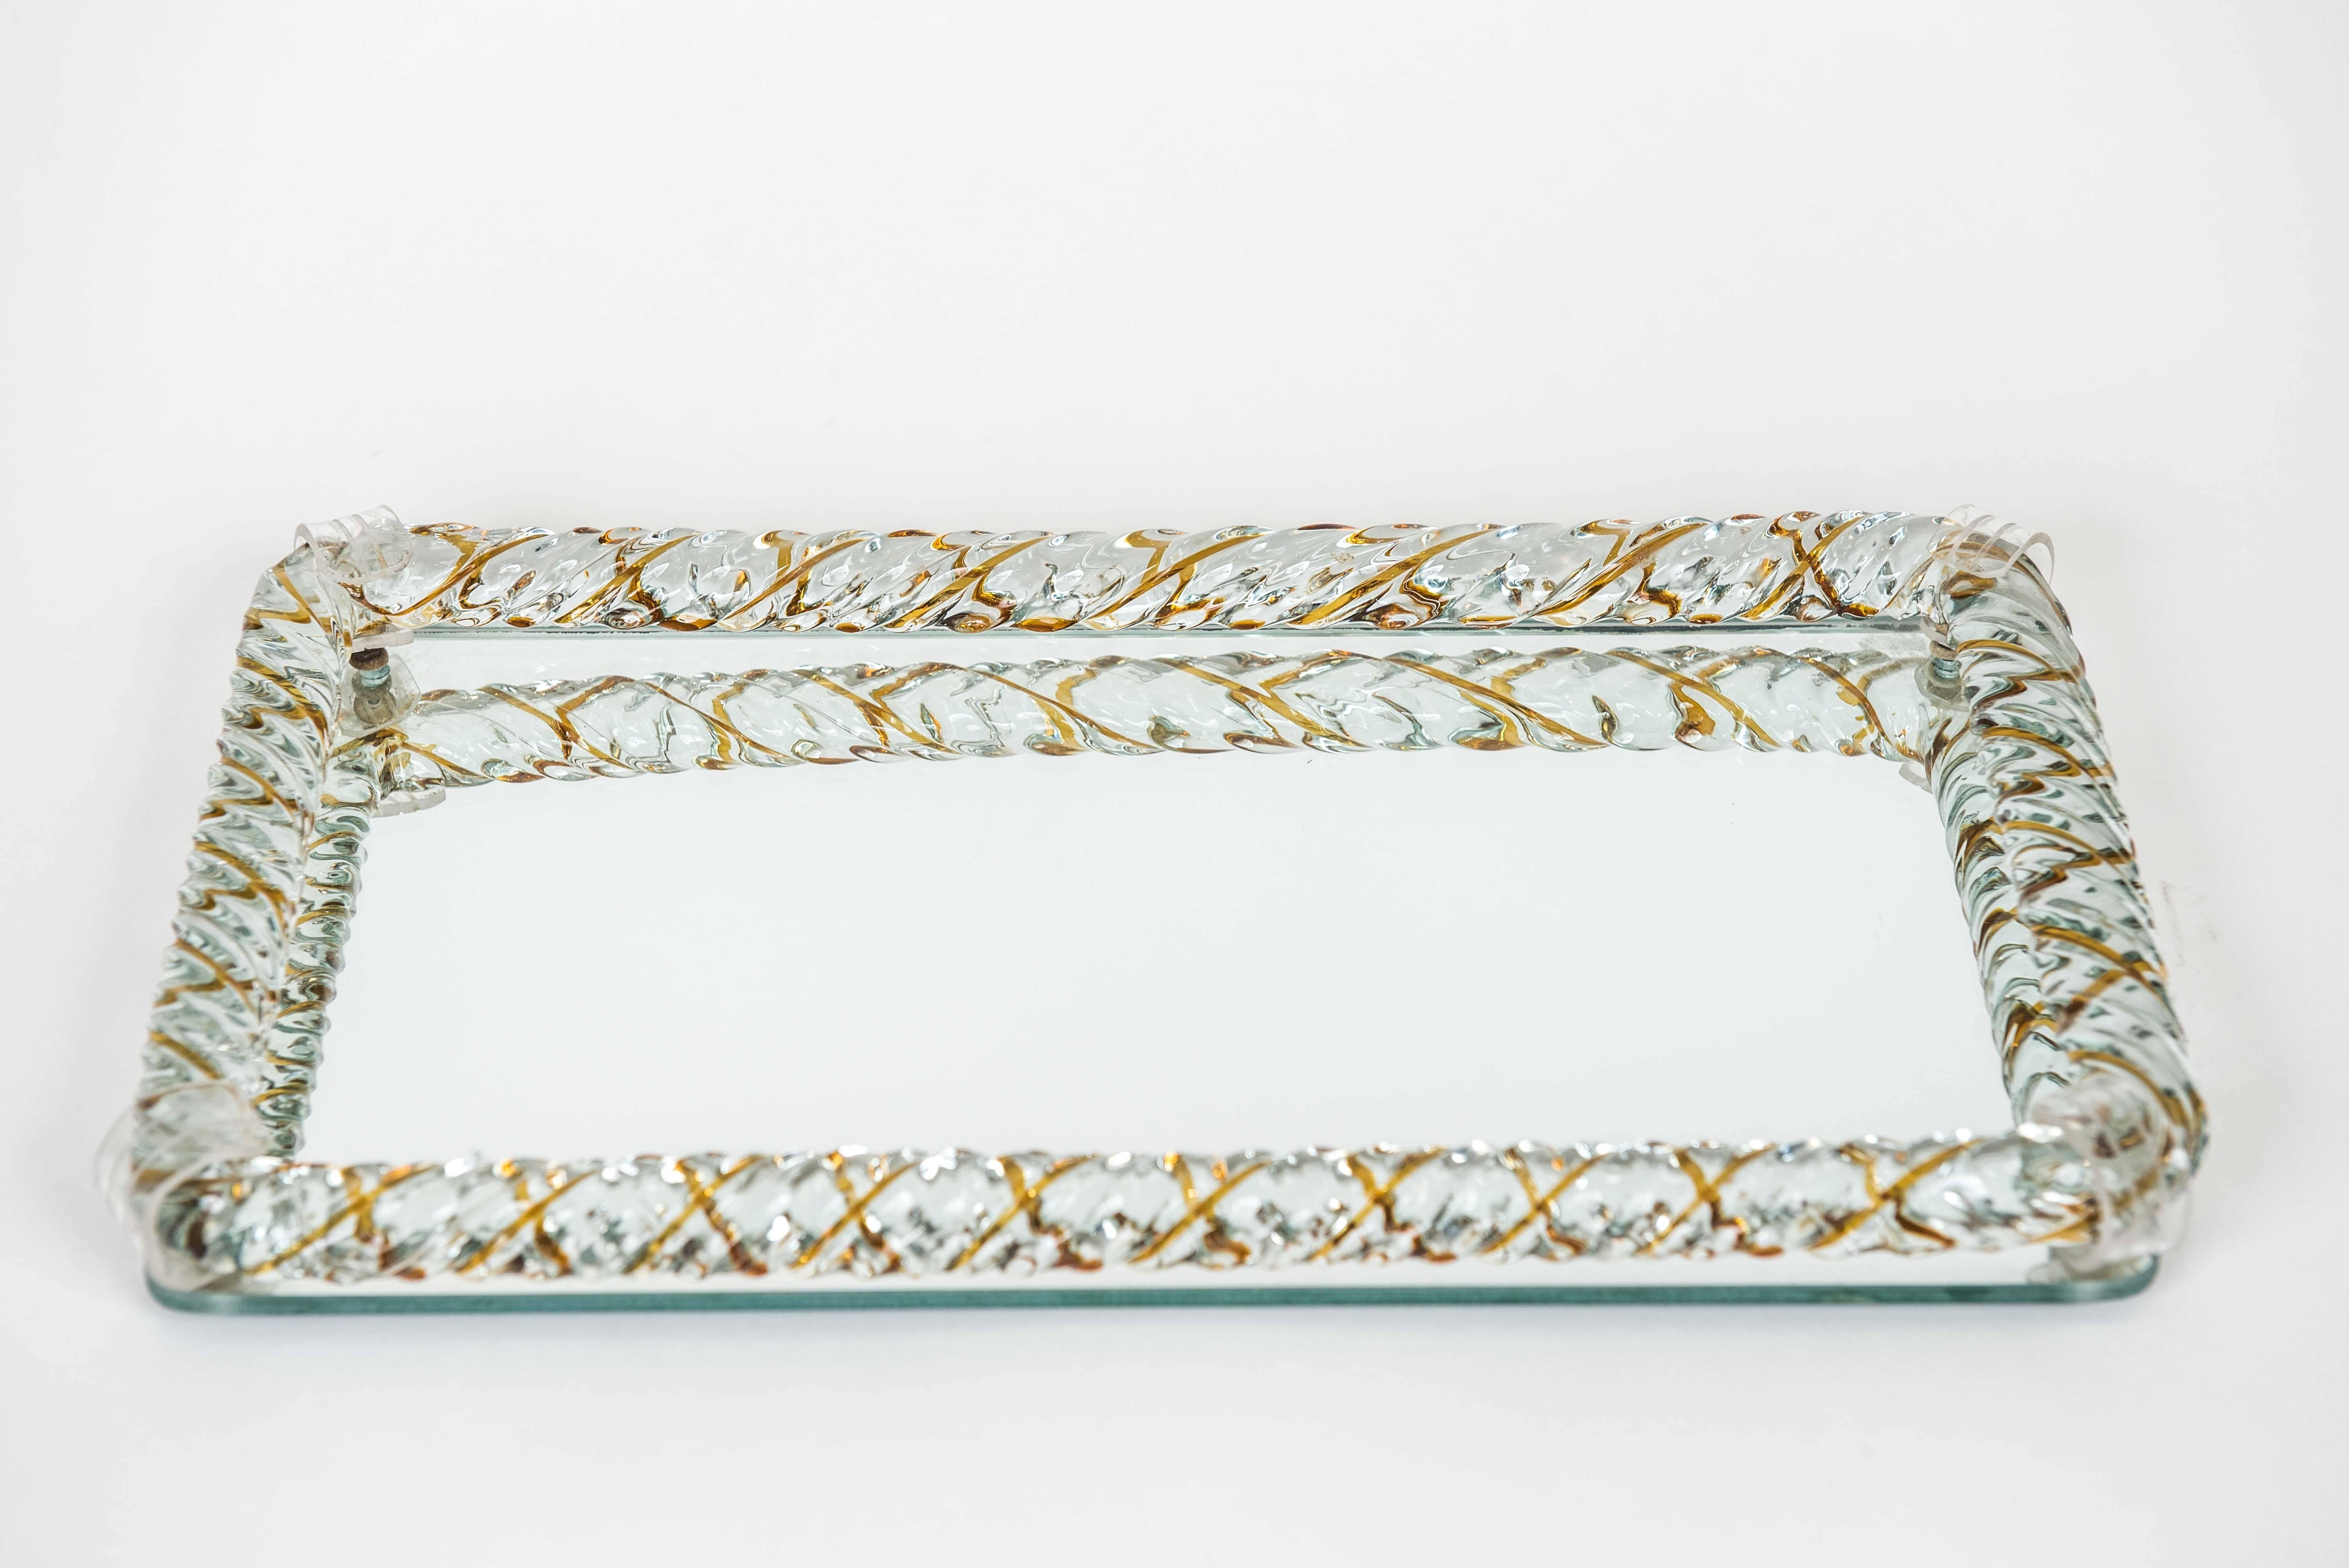 This clean and glamourous Murano tray
with braided glass edge and acrylic clasps makes a nice gift for the holiday season. It is infused with an amber detail.